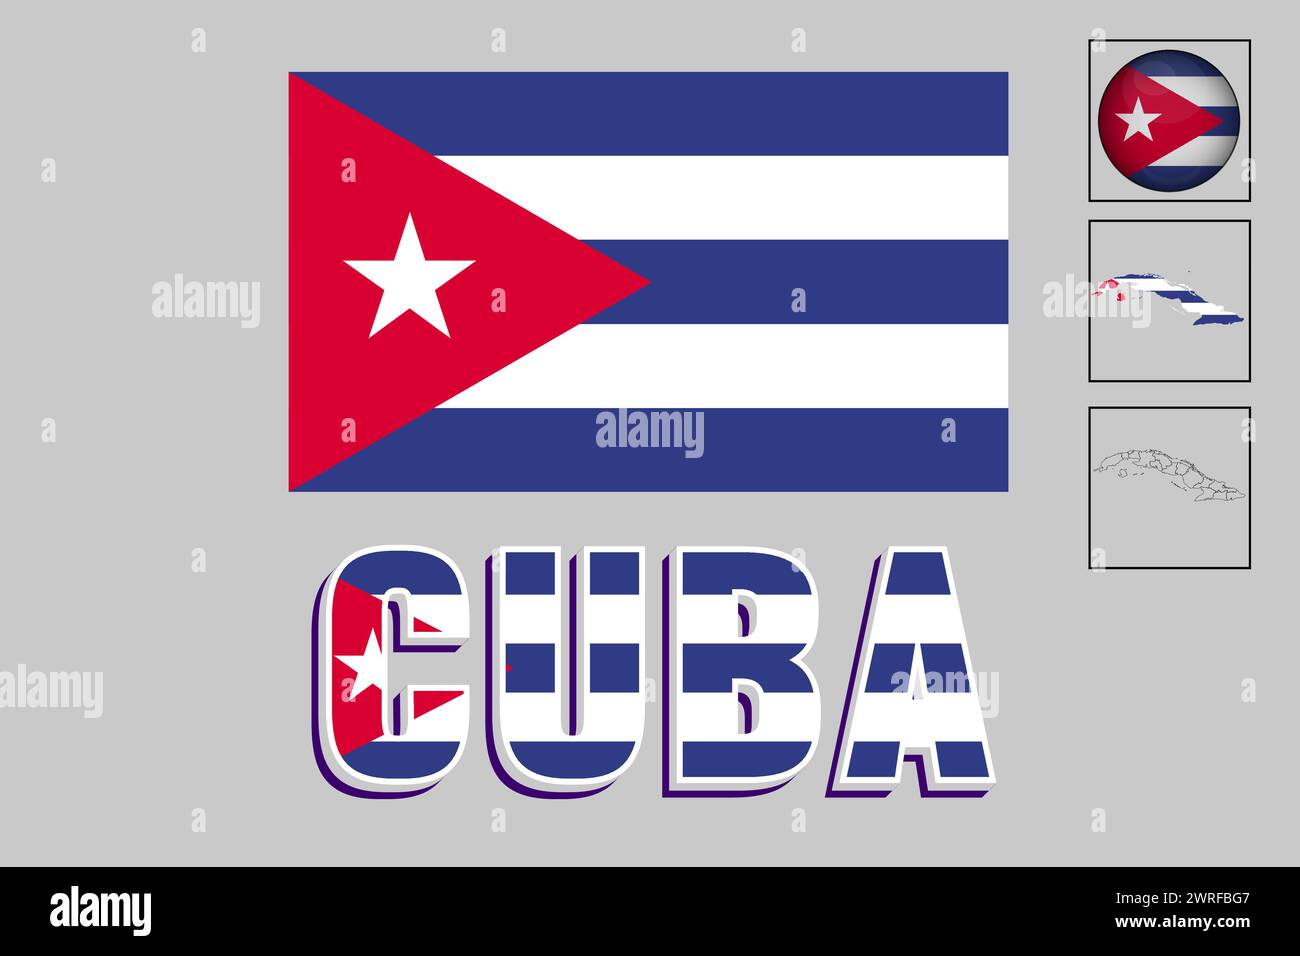 Cuba flag and map in vector illustration Stock Vector